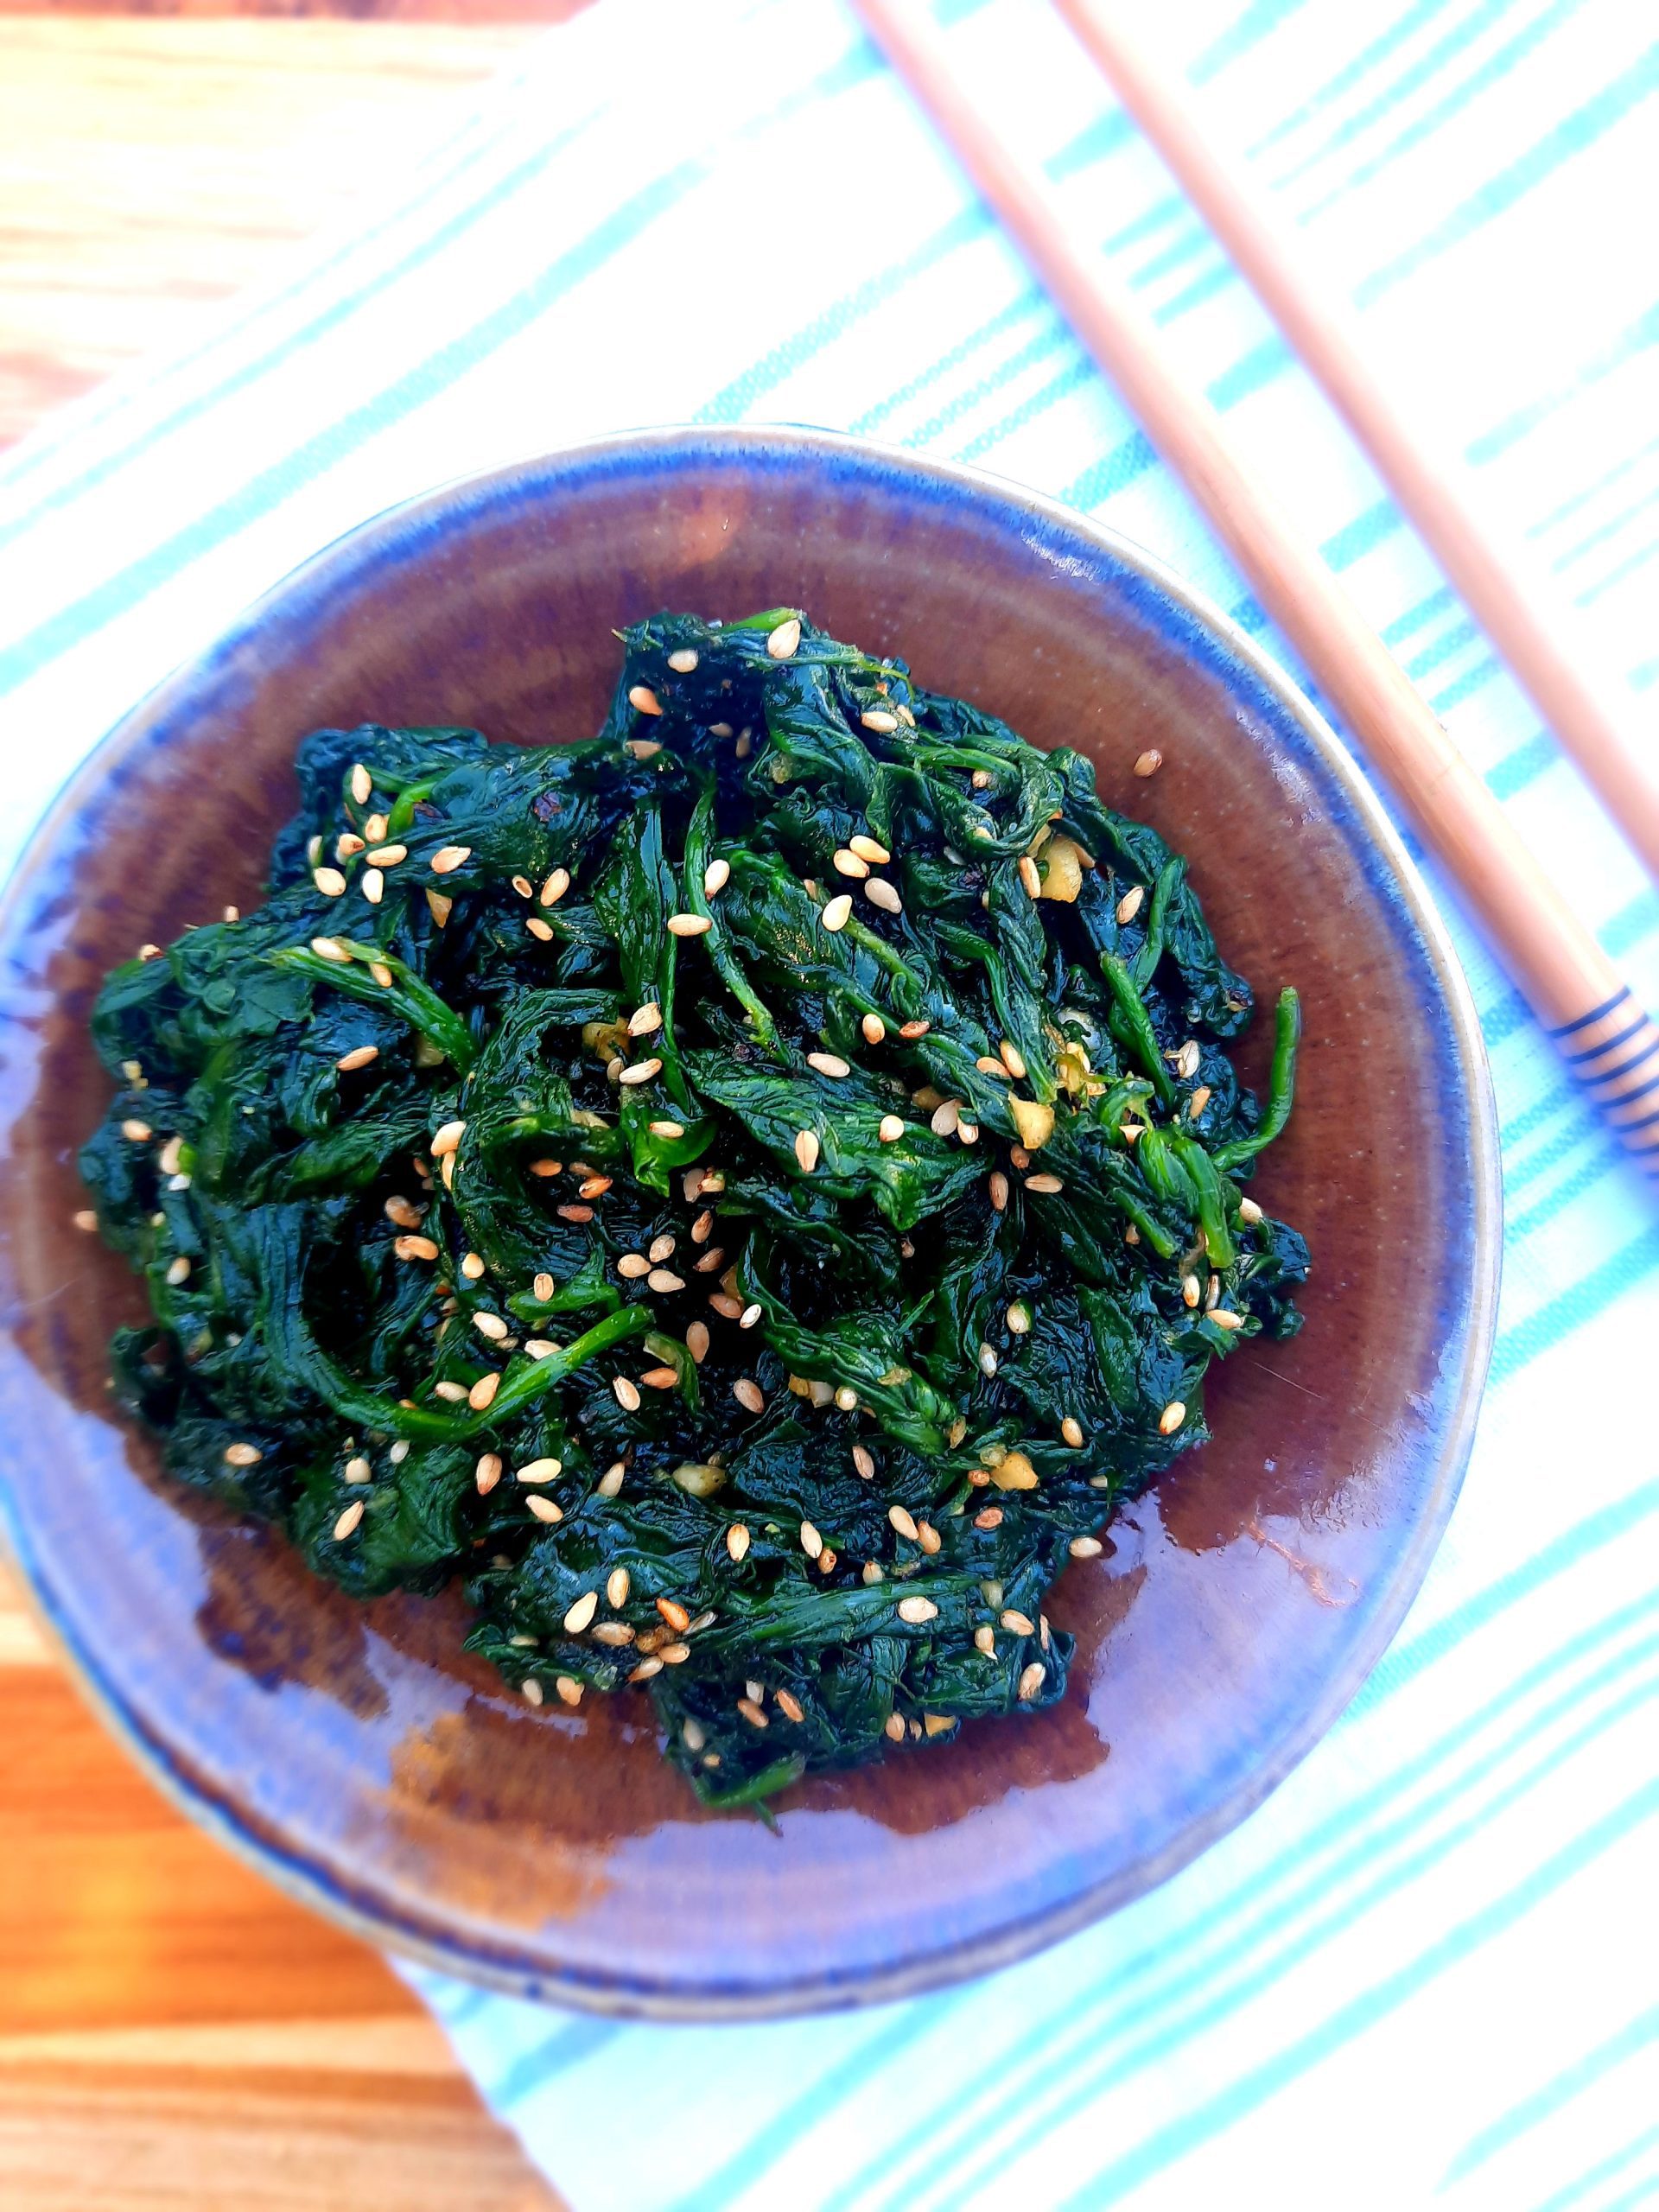 This tasty Korean barbecue side dish will make you love spinach